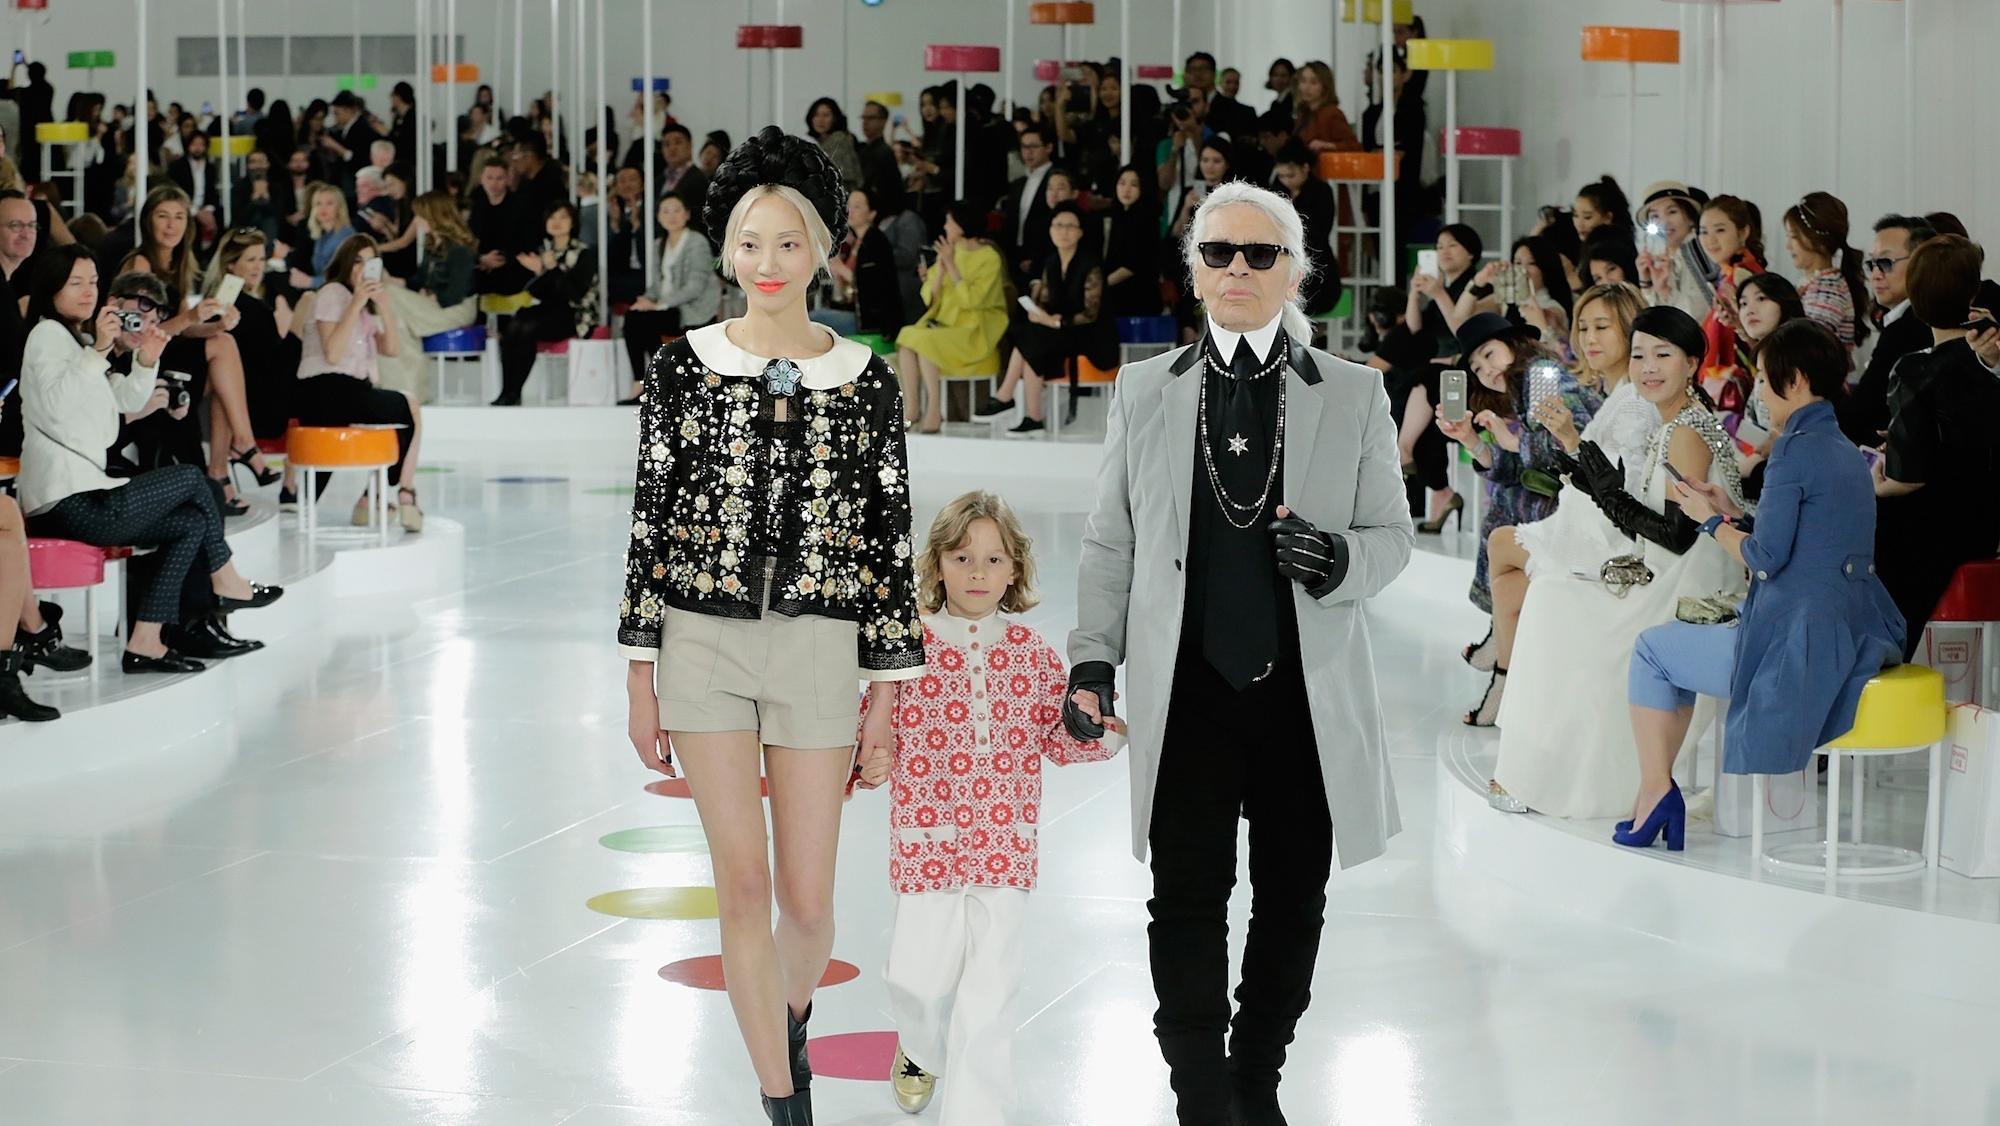 karl lagerfeld is building a club and hotel empire | read | i-D